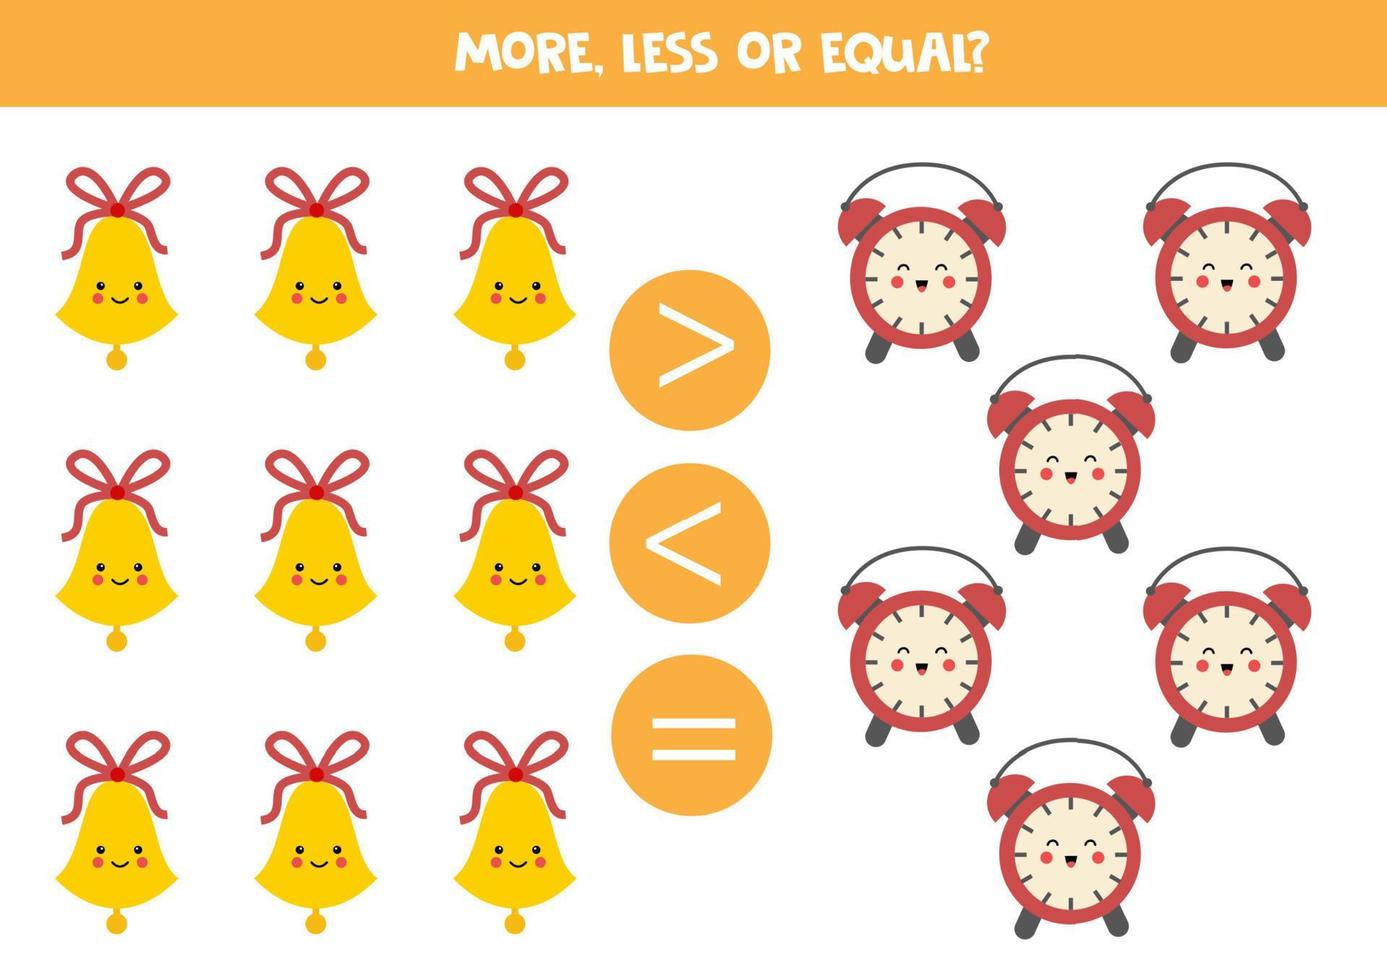 More, less or equal with cartoon bells and alarm clocks. vector